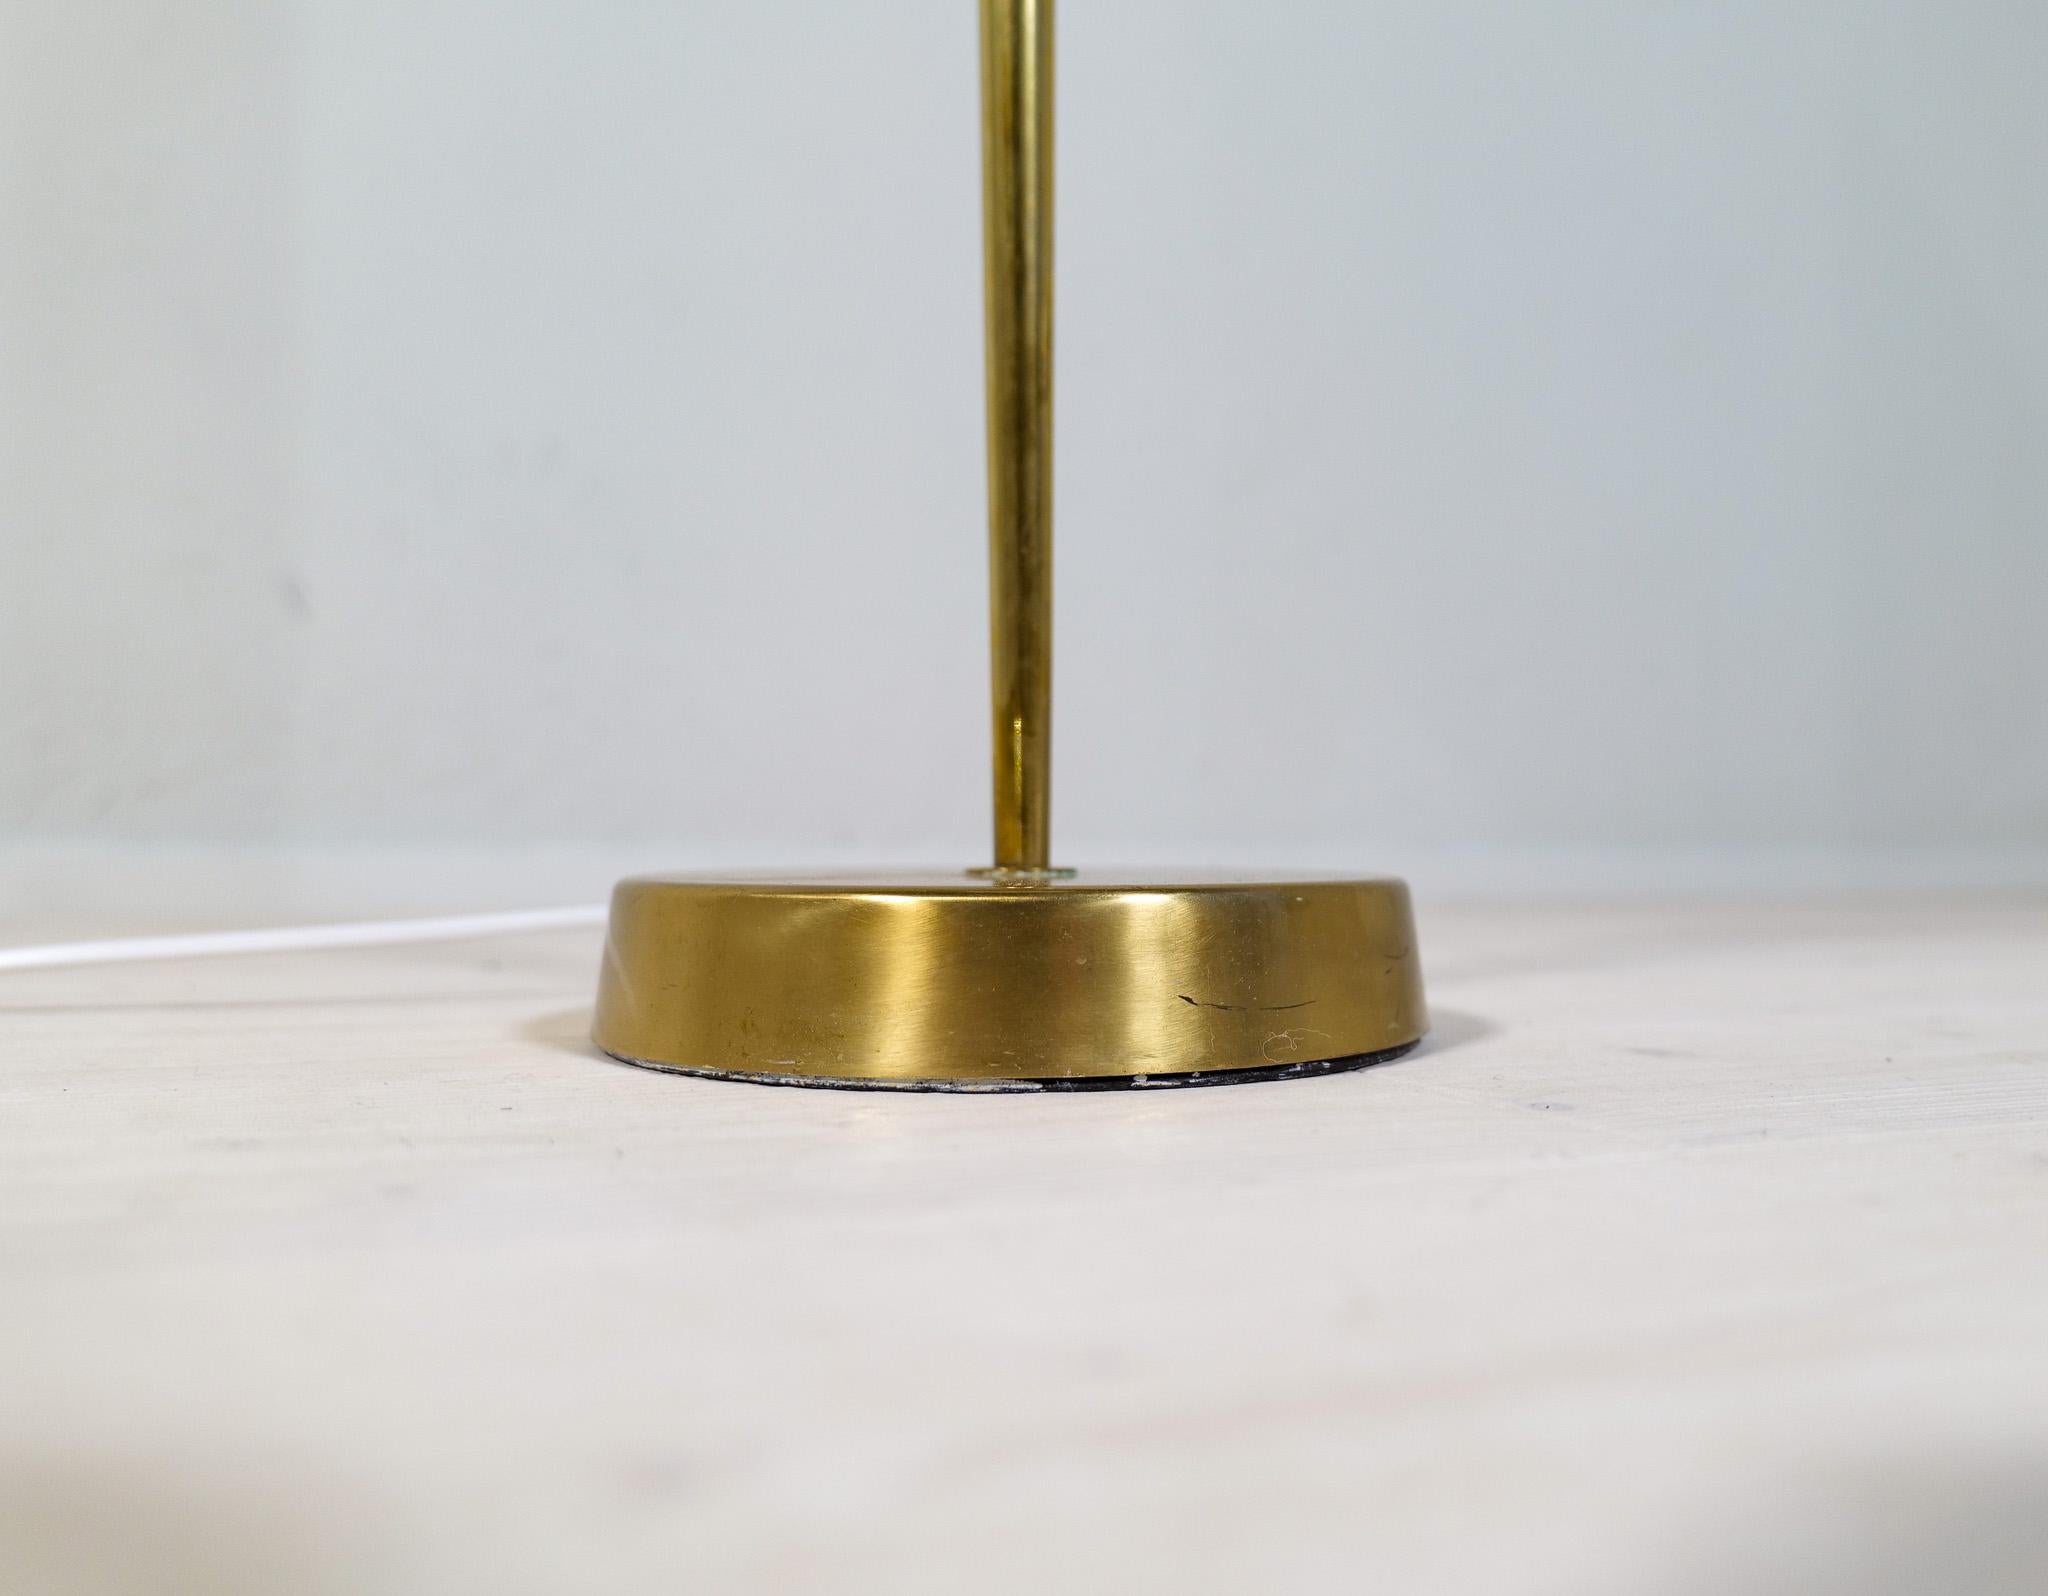 Midcentury Modern ASEA Brass Floor Lamp with Round Cotton Shade, Sweden, 1960s For Sale 6